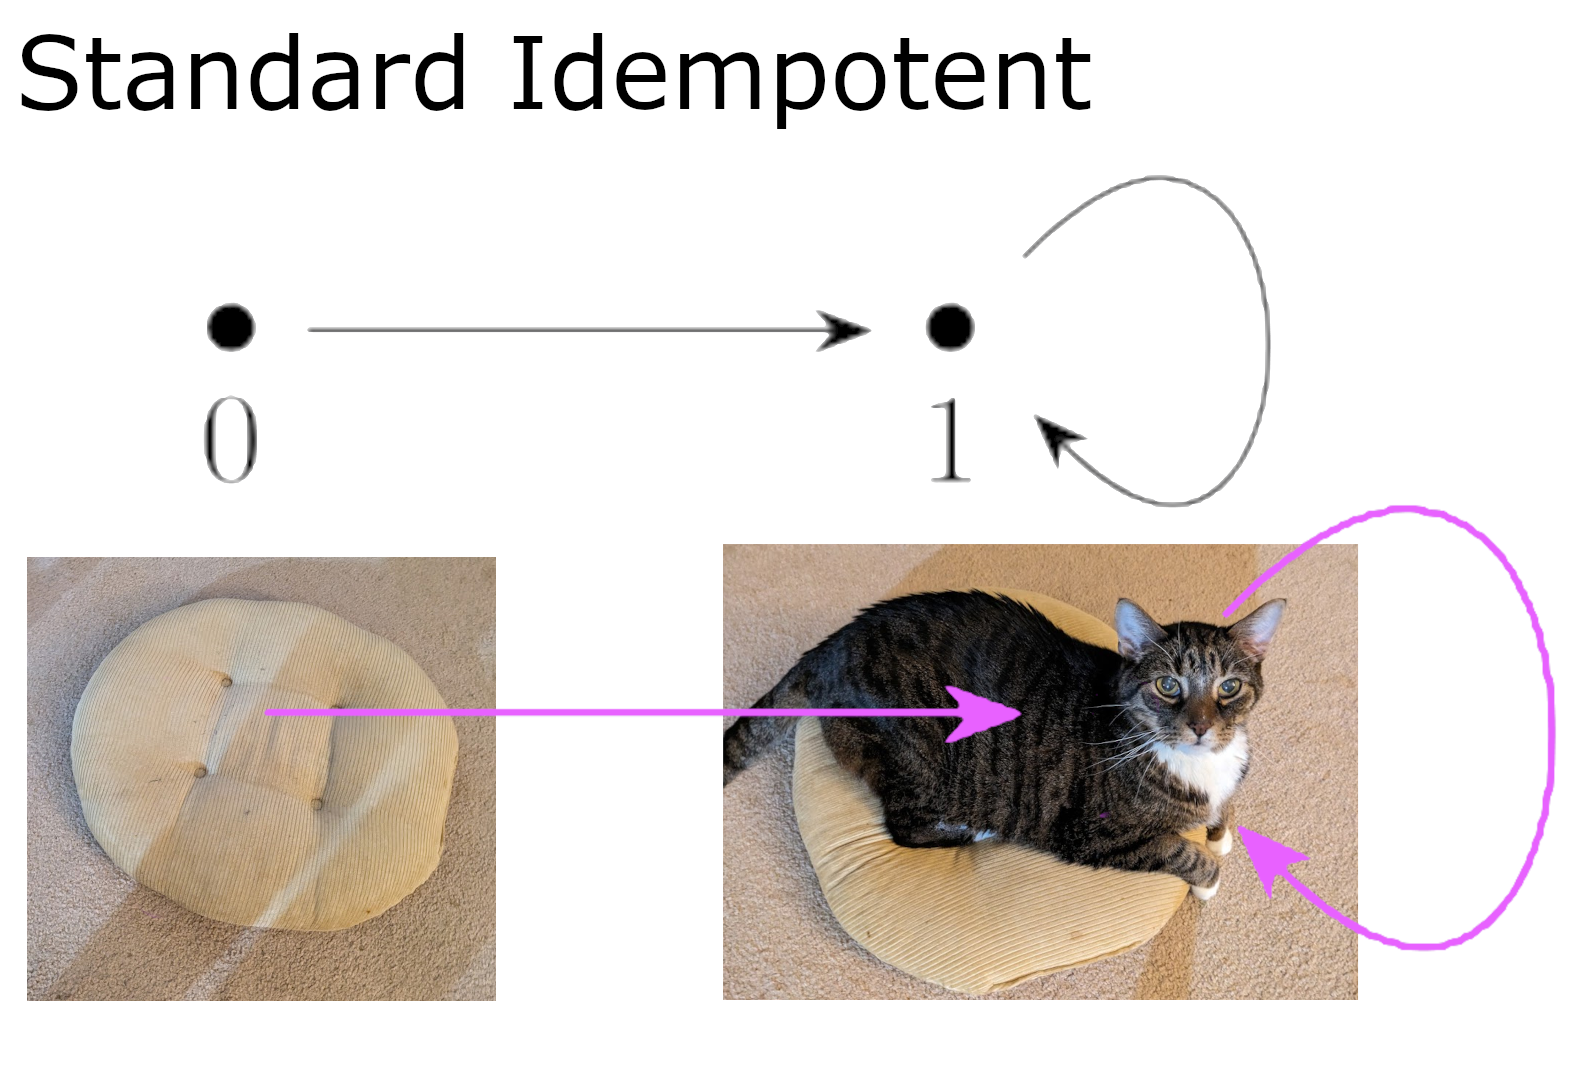 A demonstration of parallels between the "standard idempotent" illustrated by photos of a cushion with and without a cat.